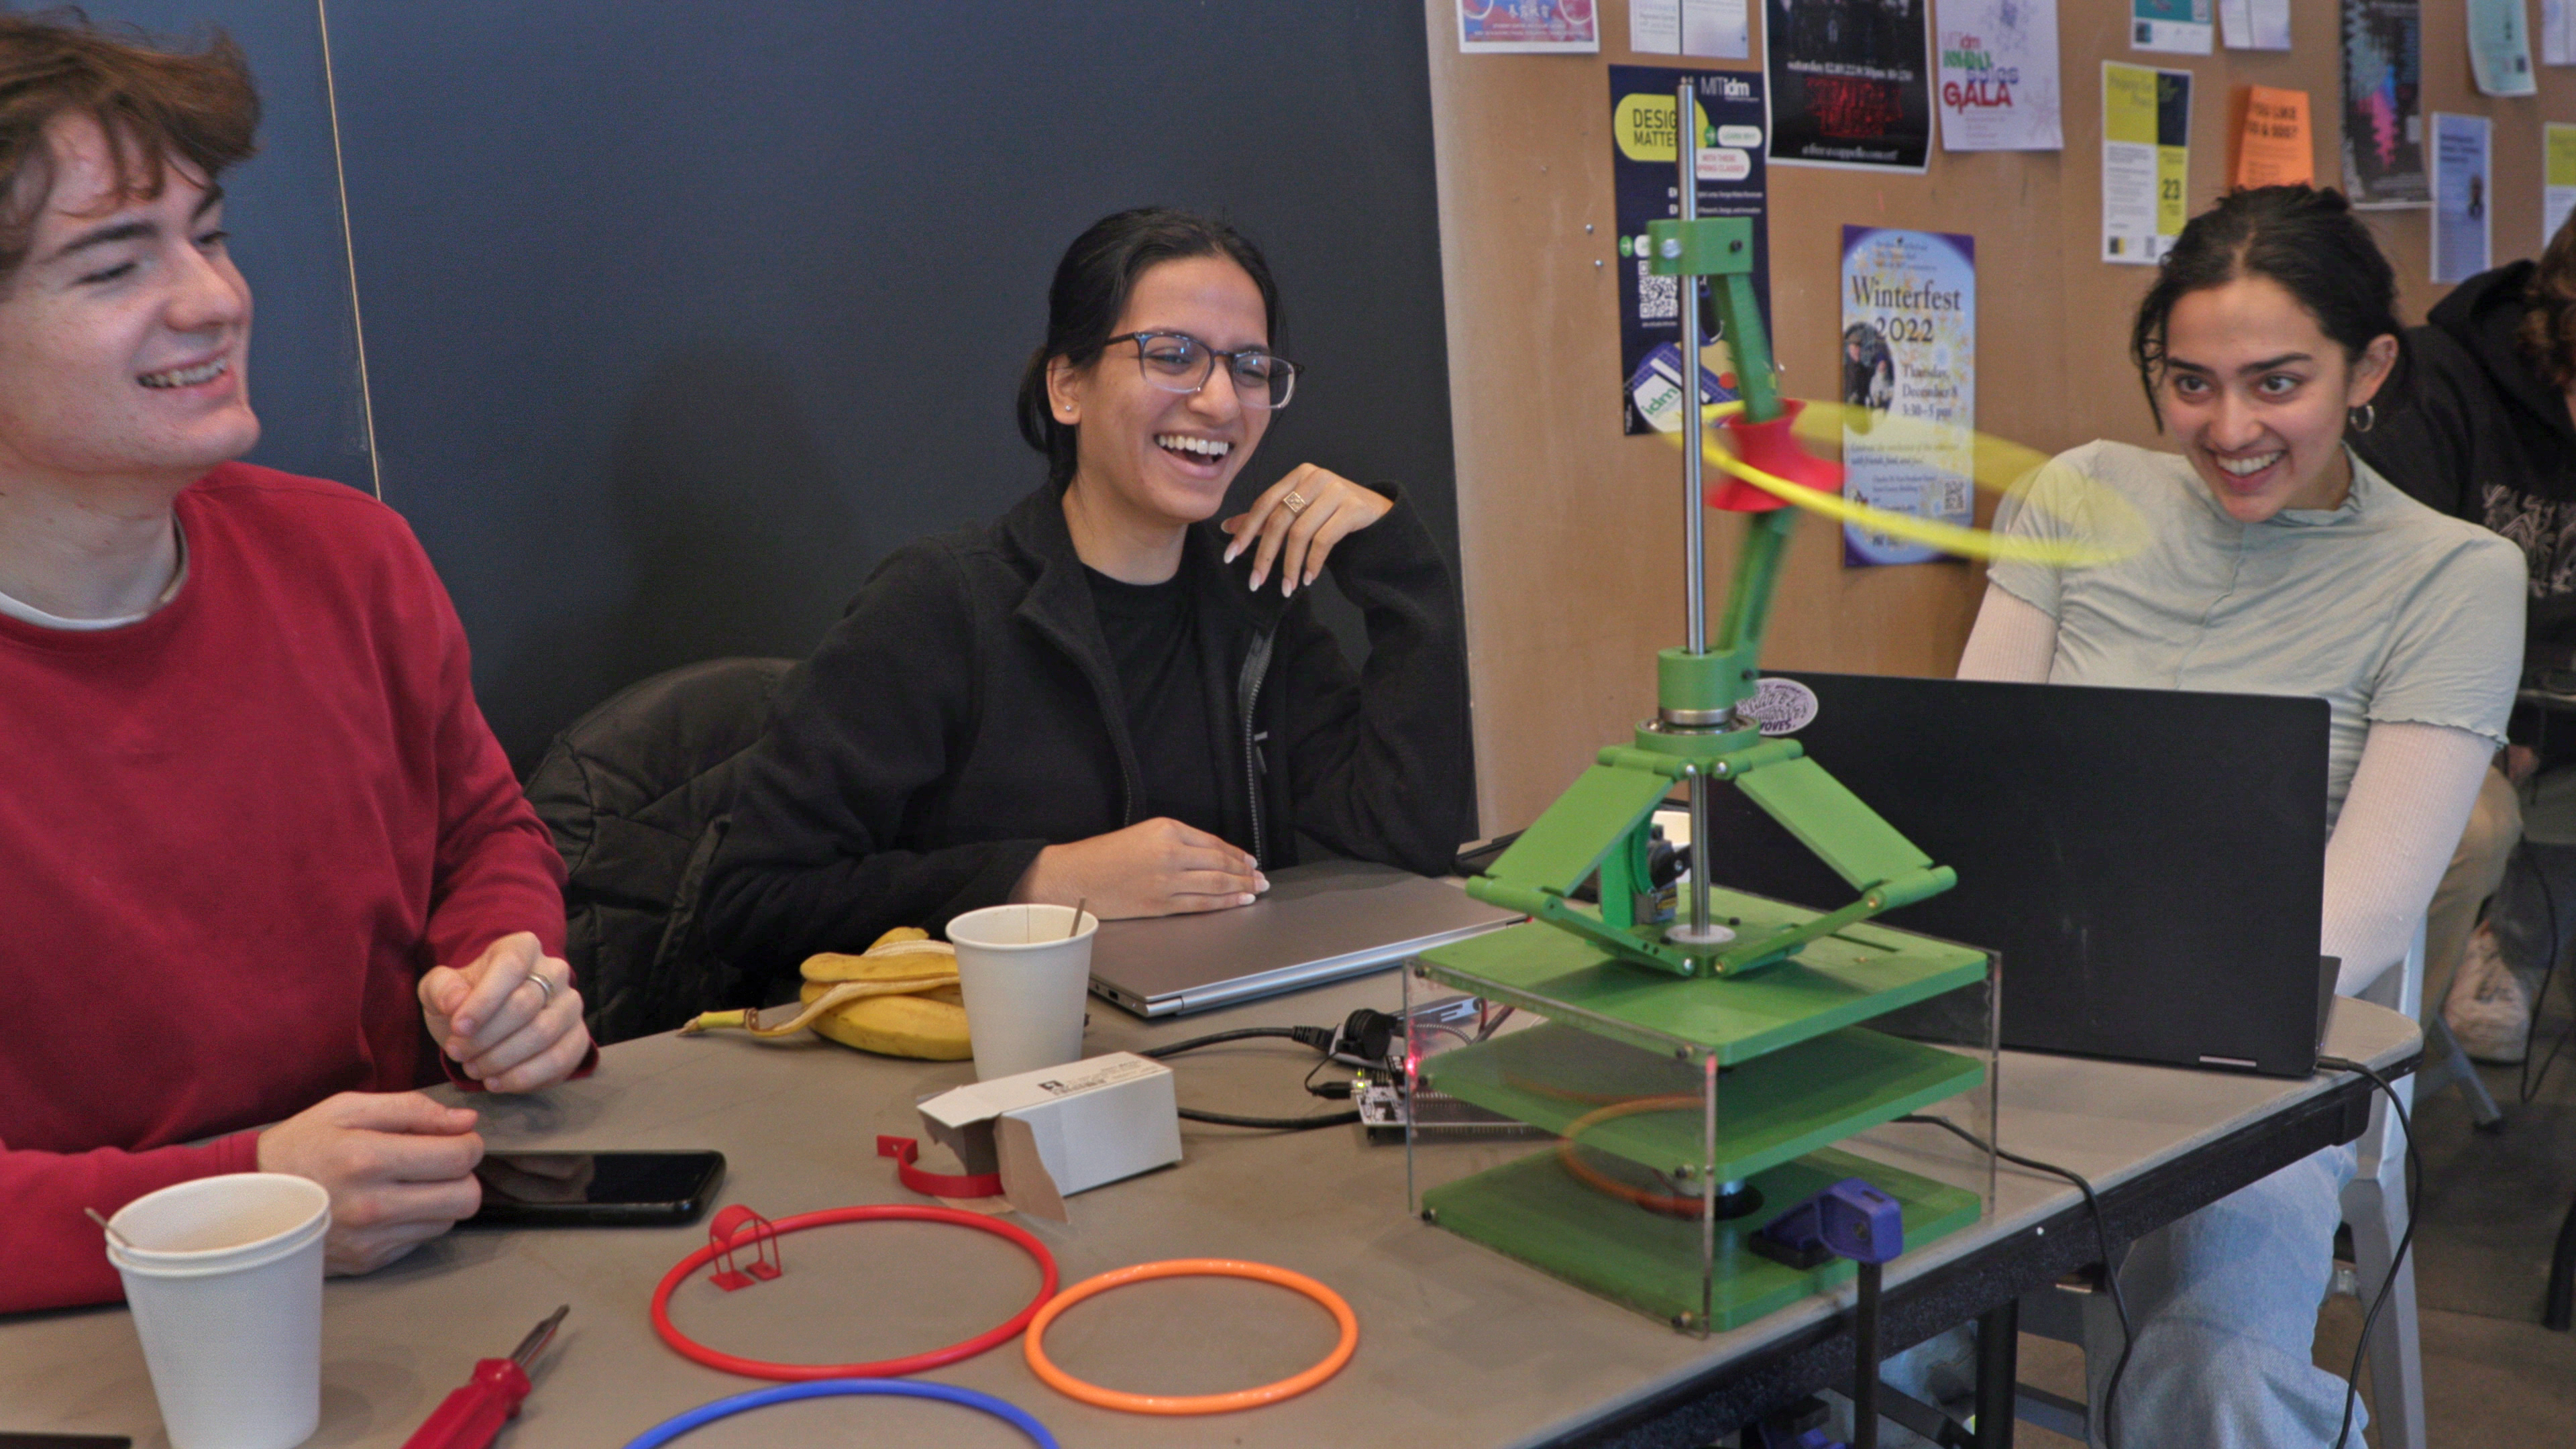 Students Michael Burgess (left), Sharmi Shah (middle), and Maheera Bawa (right) enjoy the fruits of their labor in the form of their hula-hooping robot, Hula Hooper, performing a successful demonstration during the classes final project exhibition.